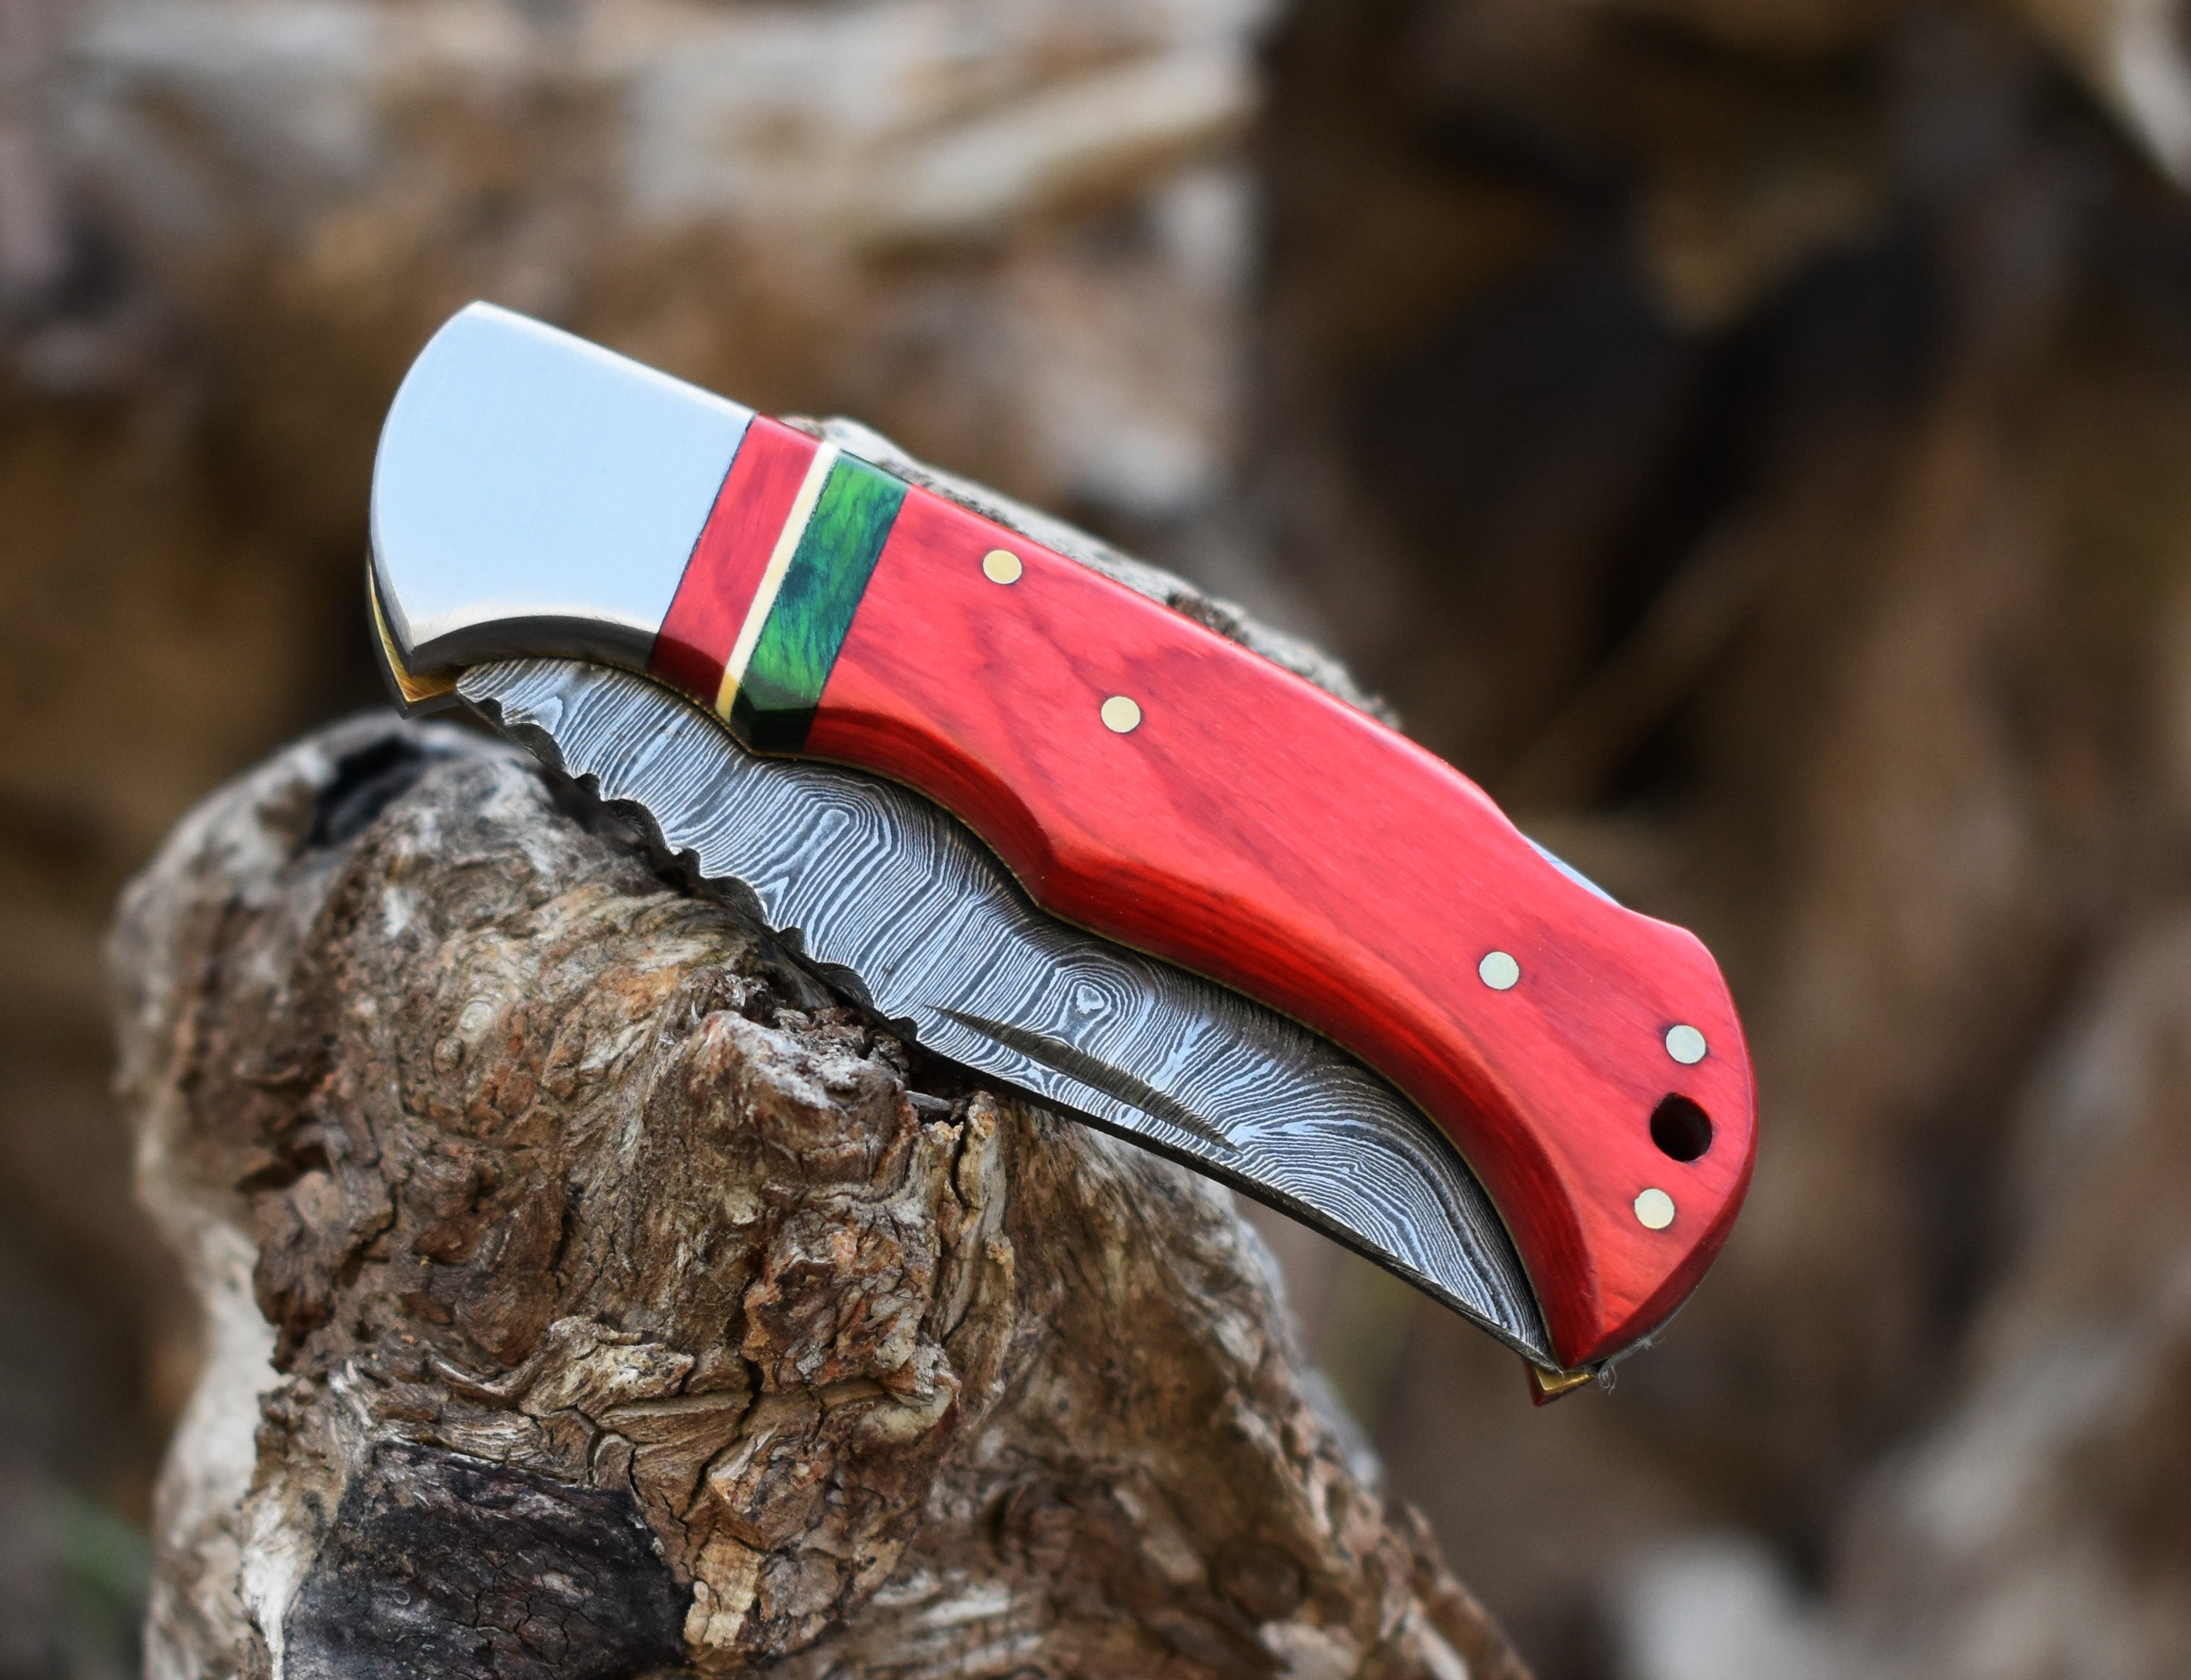 6.5" Handmade Damascus Steel Folding Knife Red& GreenHandle Back Lock Pocket Knife With Leather Pouch Personalized Gift for Men.